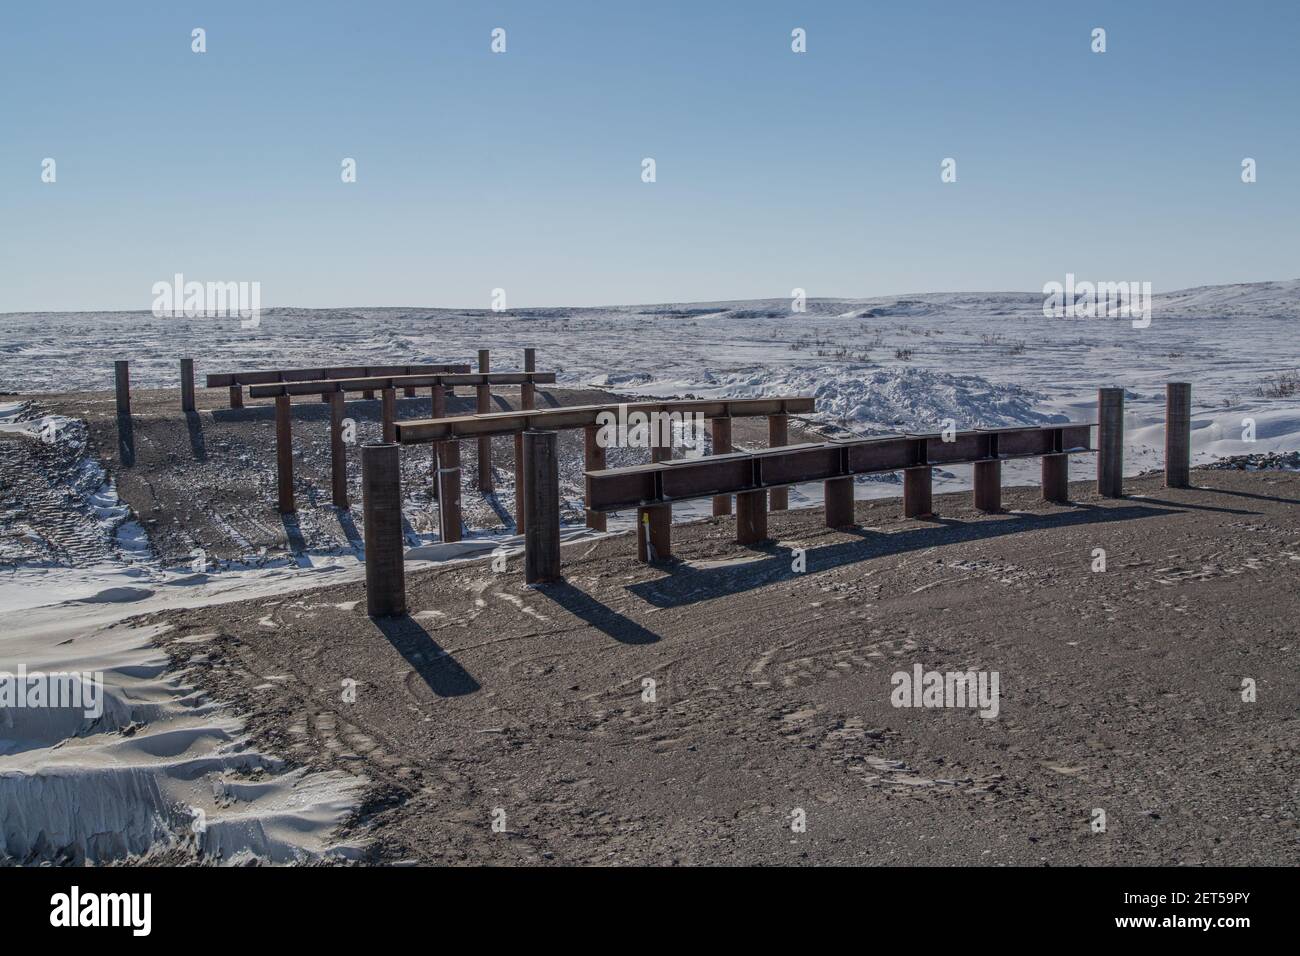 Pilings in place for construction of Bridge A3, one of 8 bridges along the gravel Inuvik-Tuktoyaktuk Highway, Northwest Territories, Canada's Arctic. Stock Photo